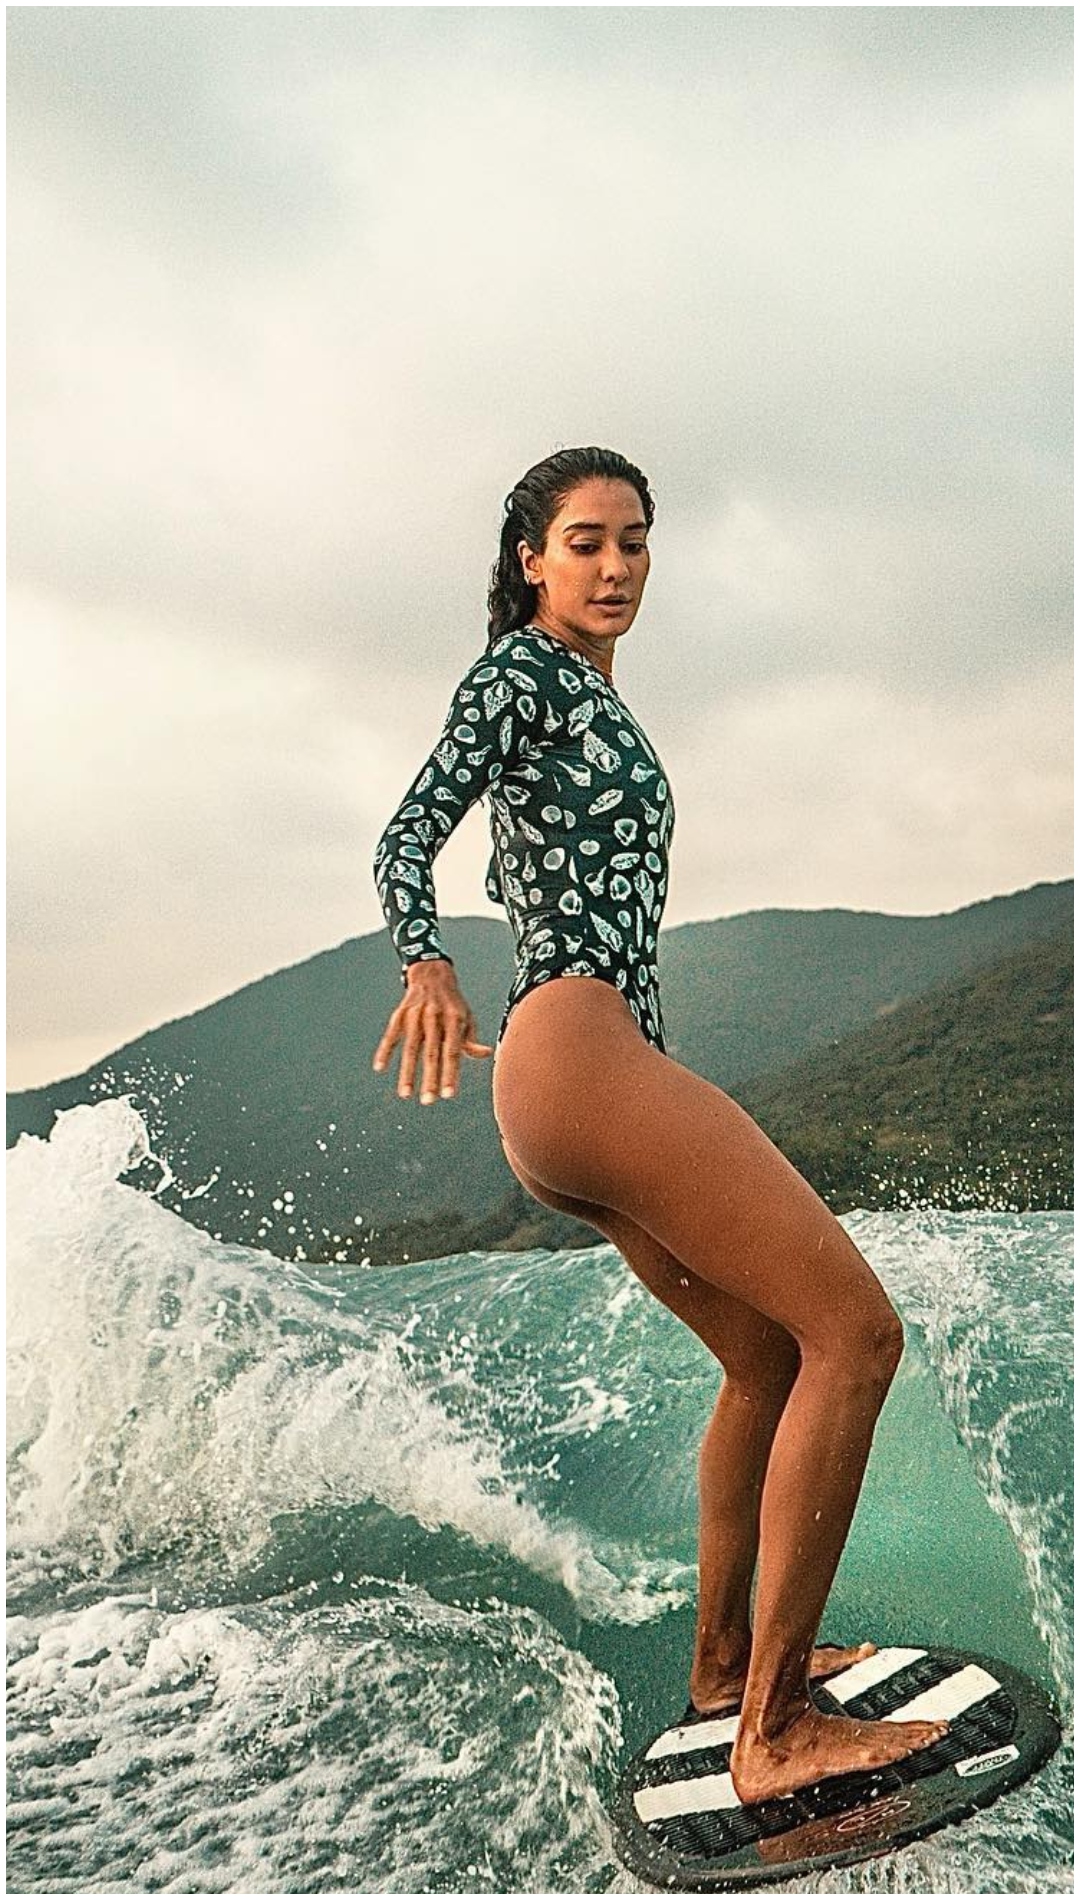 Lisa Haydon likes beach vacations and this picture is proof. The hot actress gives a sneak peek of the fun time she had while surfing